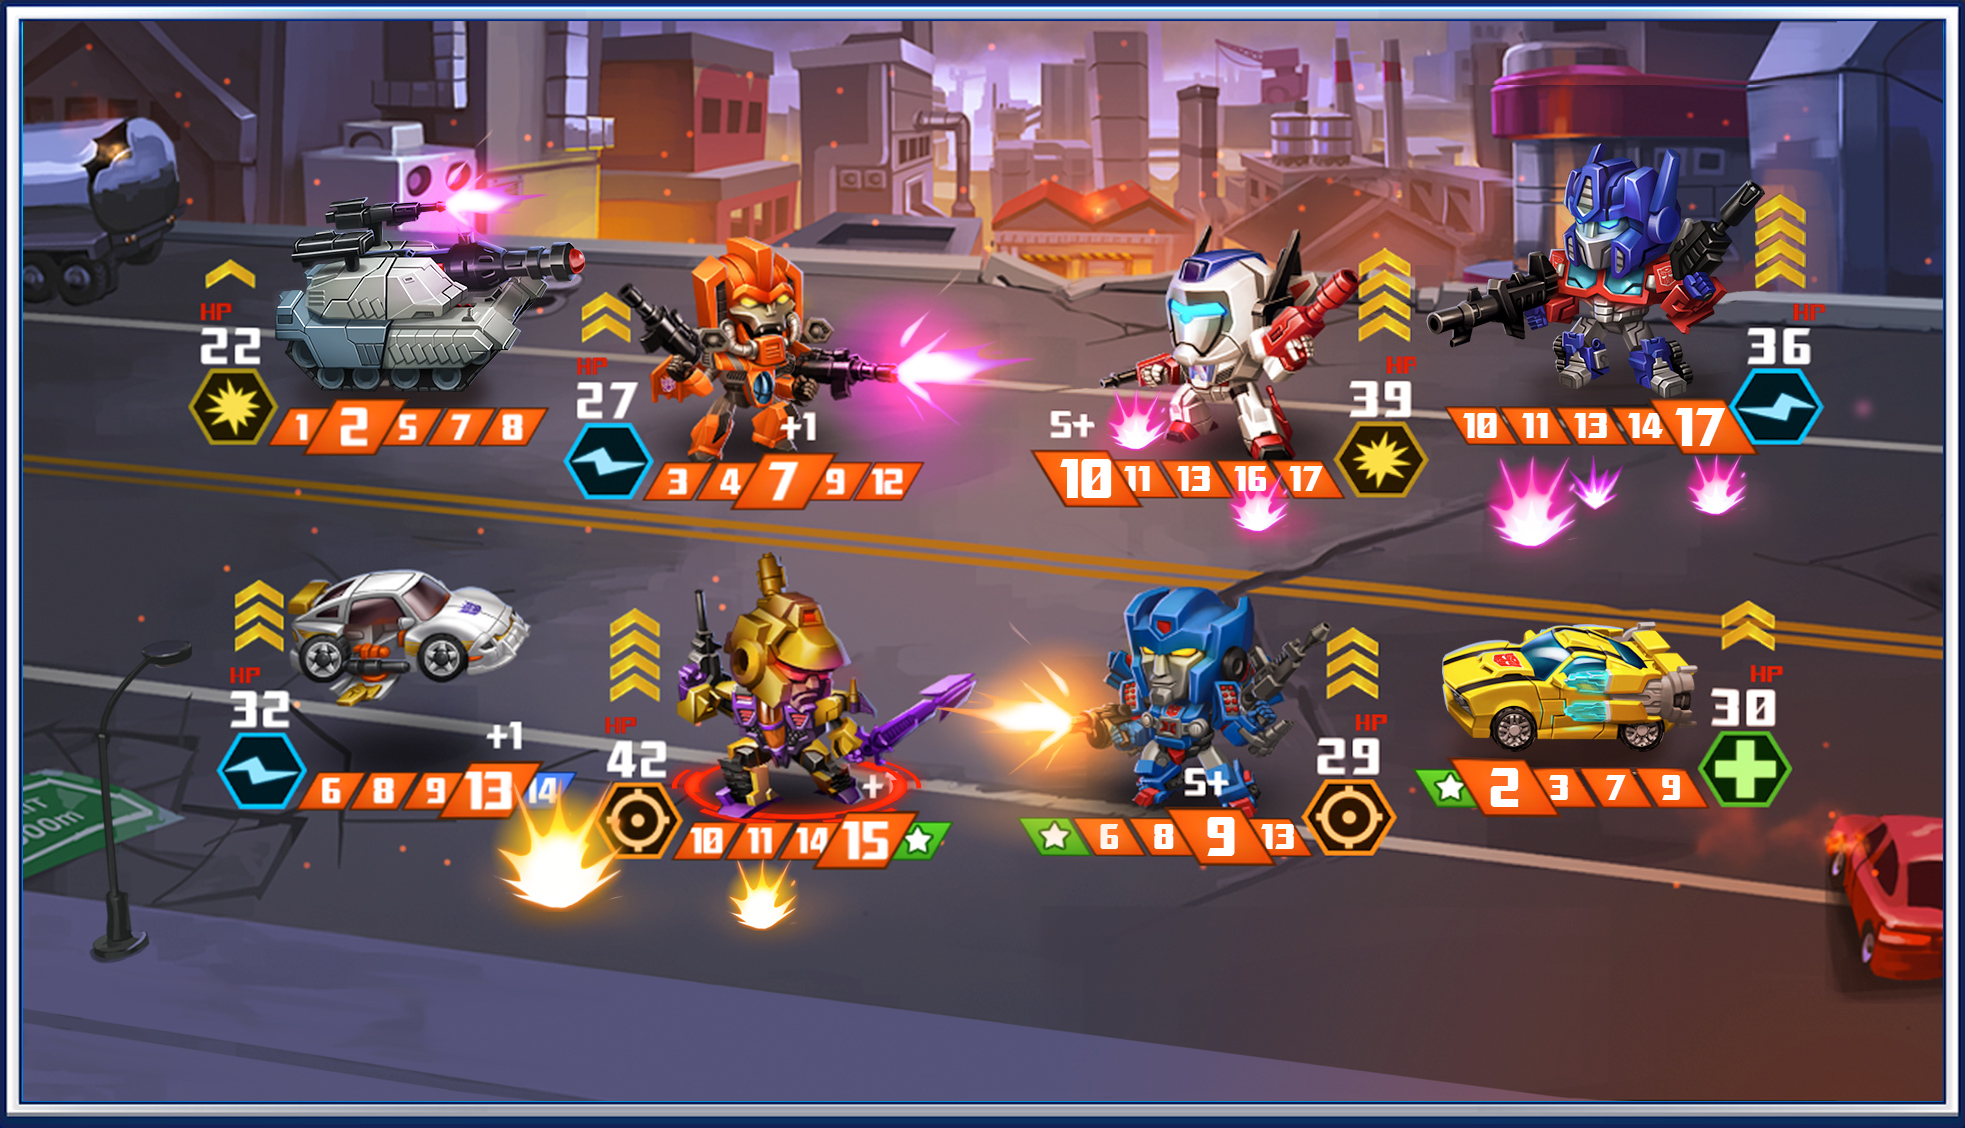 [Jeu Mobile] Transformers - Angry Birds, Forged to Fight, Earth Wars, Bumblebee Overdrive, etc - Page 6 Plain-battle-03